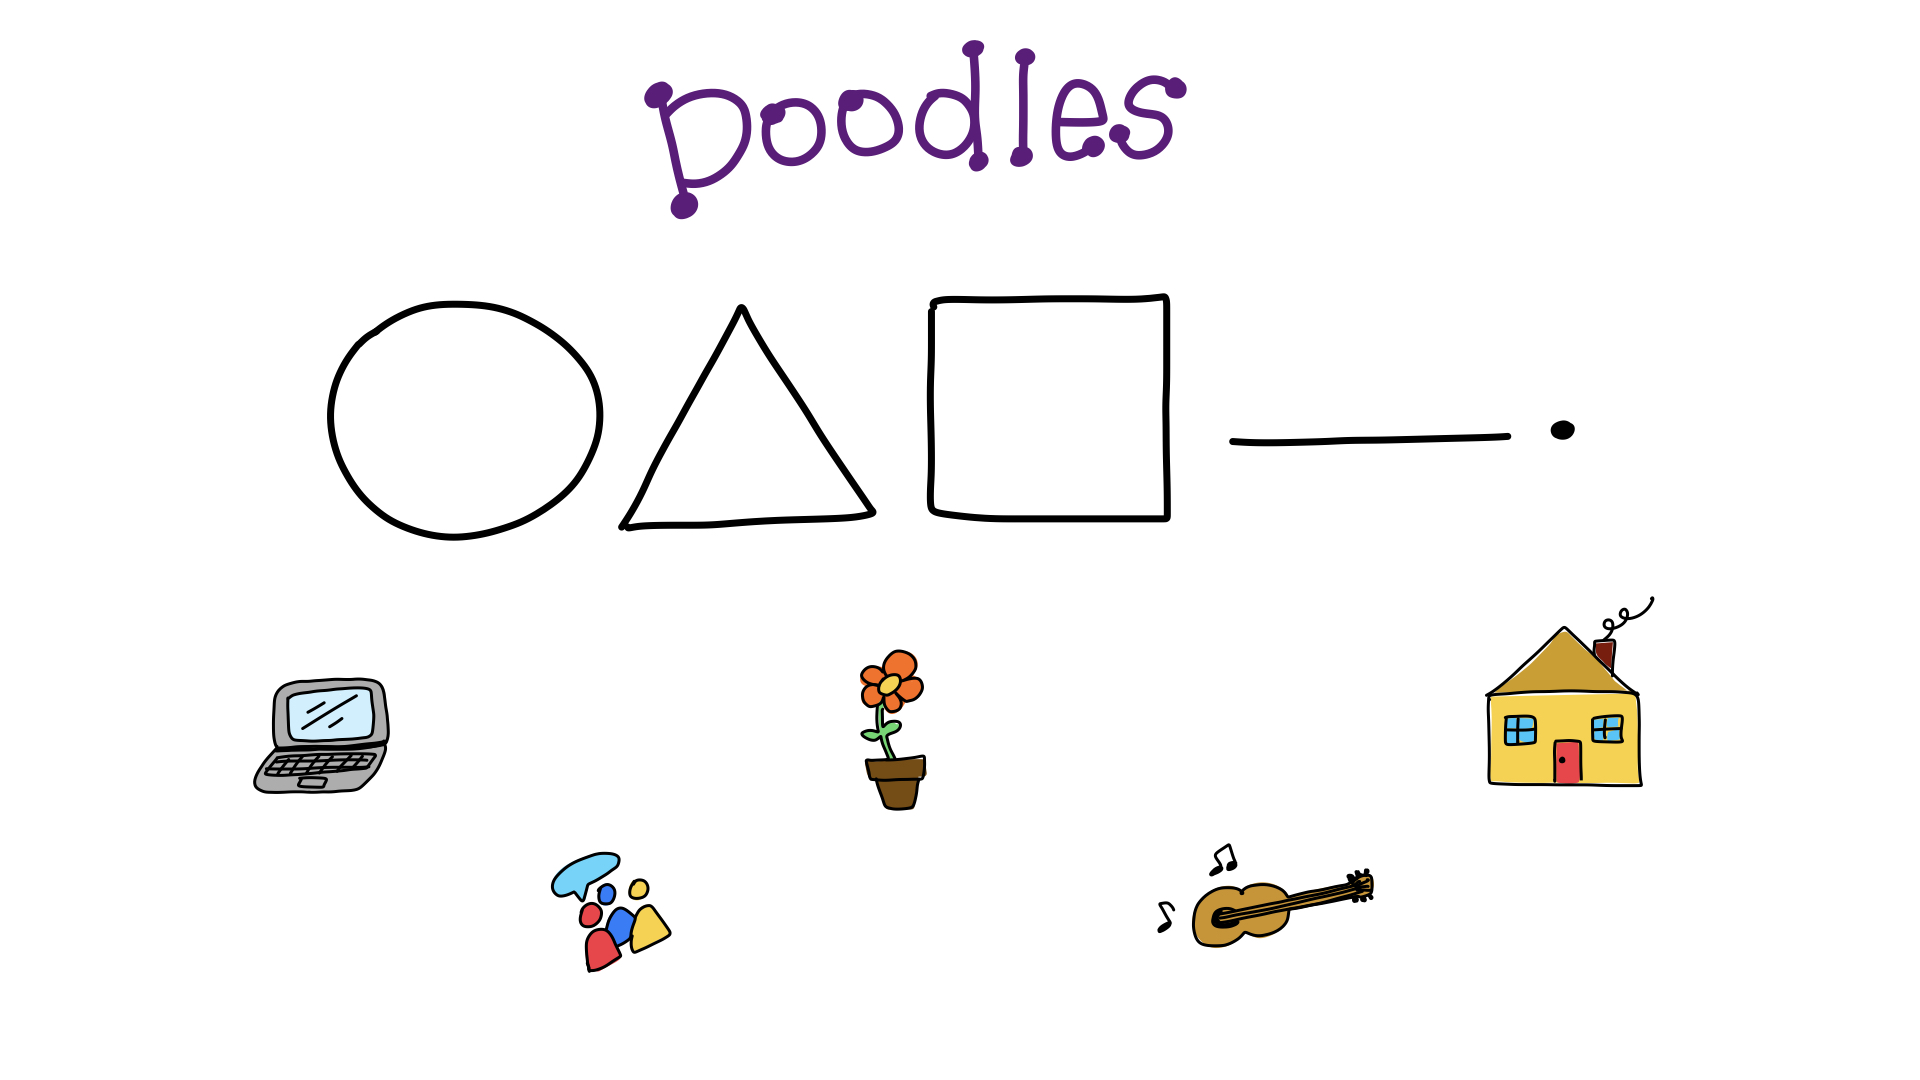 Almost any doodle can be made with 5 basic shapes: circle, triangle, square, a line, and a dot